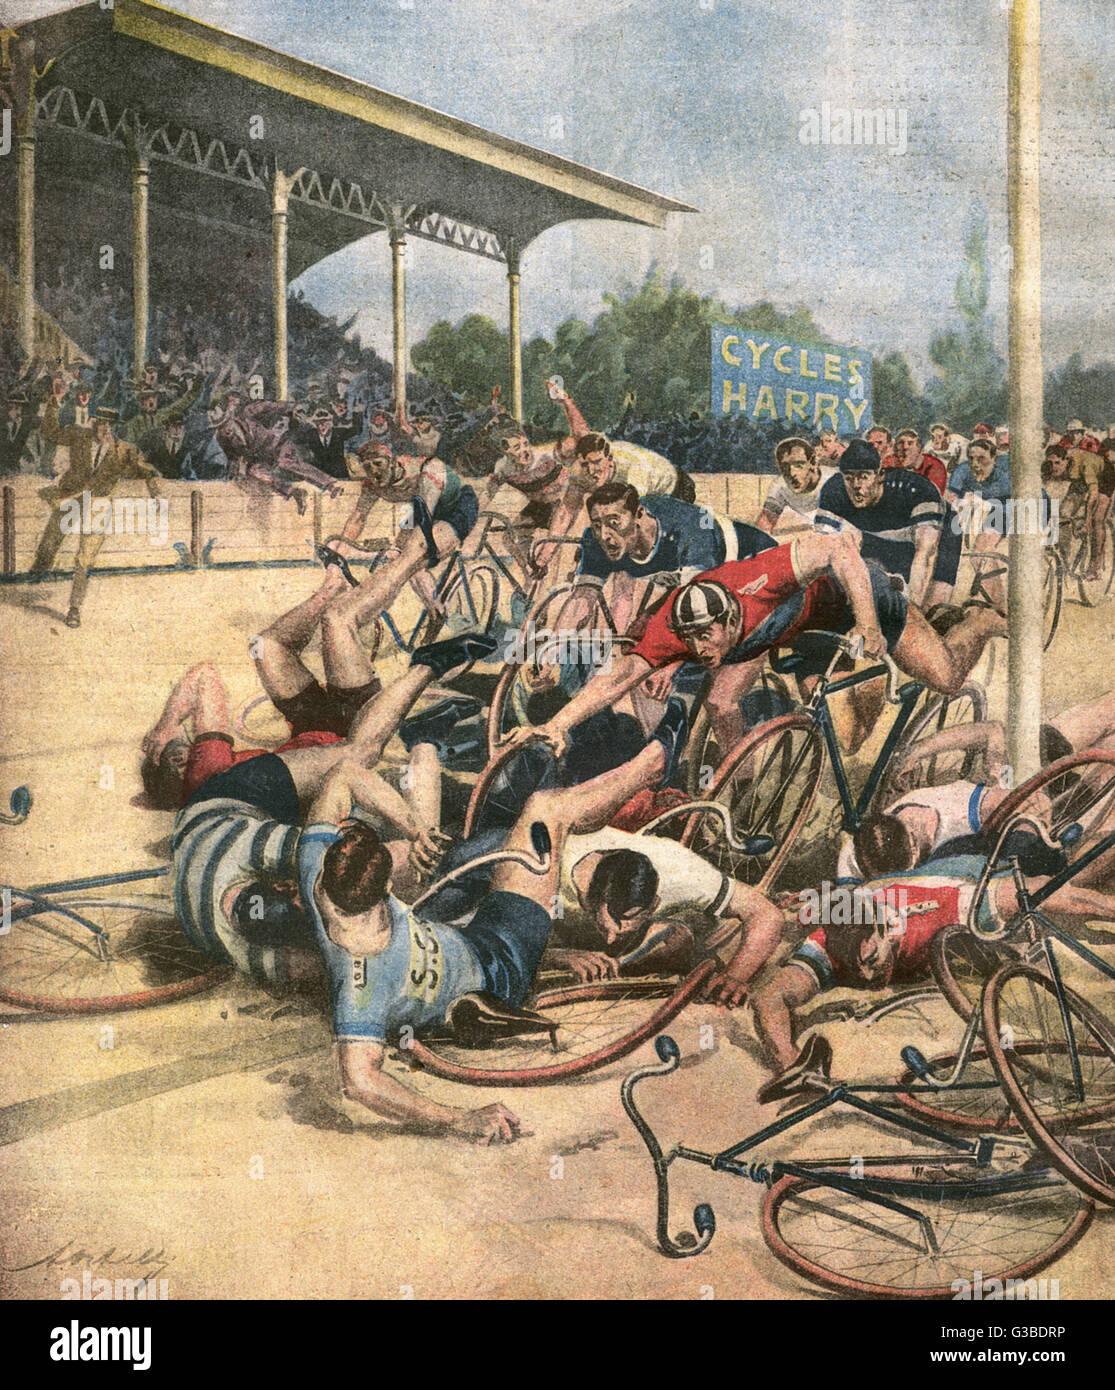 During the 100 kilometre race  at New York, a nasty pile-up  occurs involving several  riders.      Date: August 1923 Stock Photo